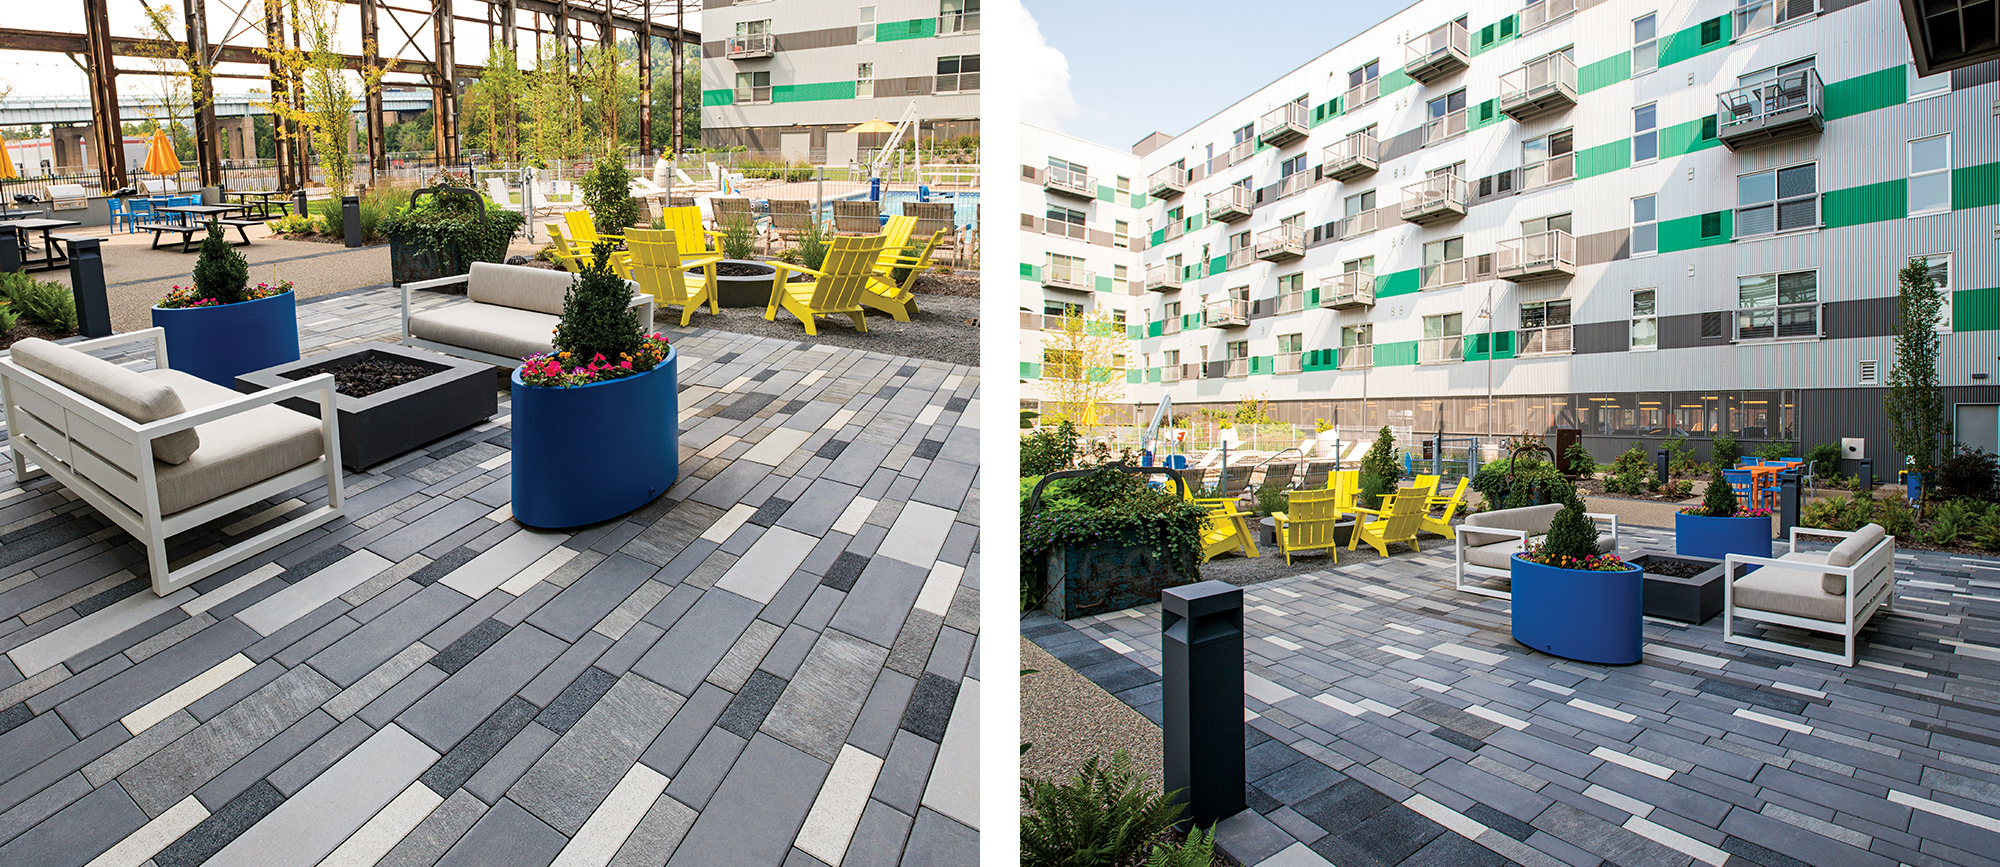 Pavers at the The Foundry multifamily in Pittsburgh were used to make a friendly urban gesture to the neighborhood and provide a nice amenity space for the residents.